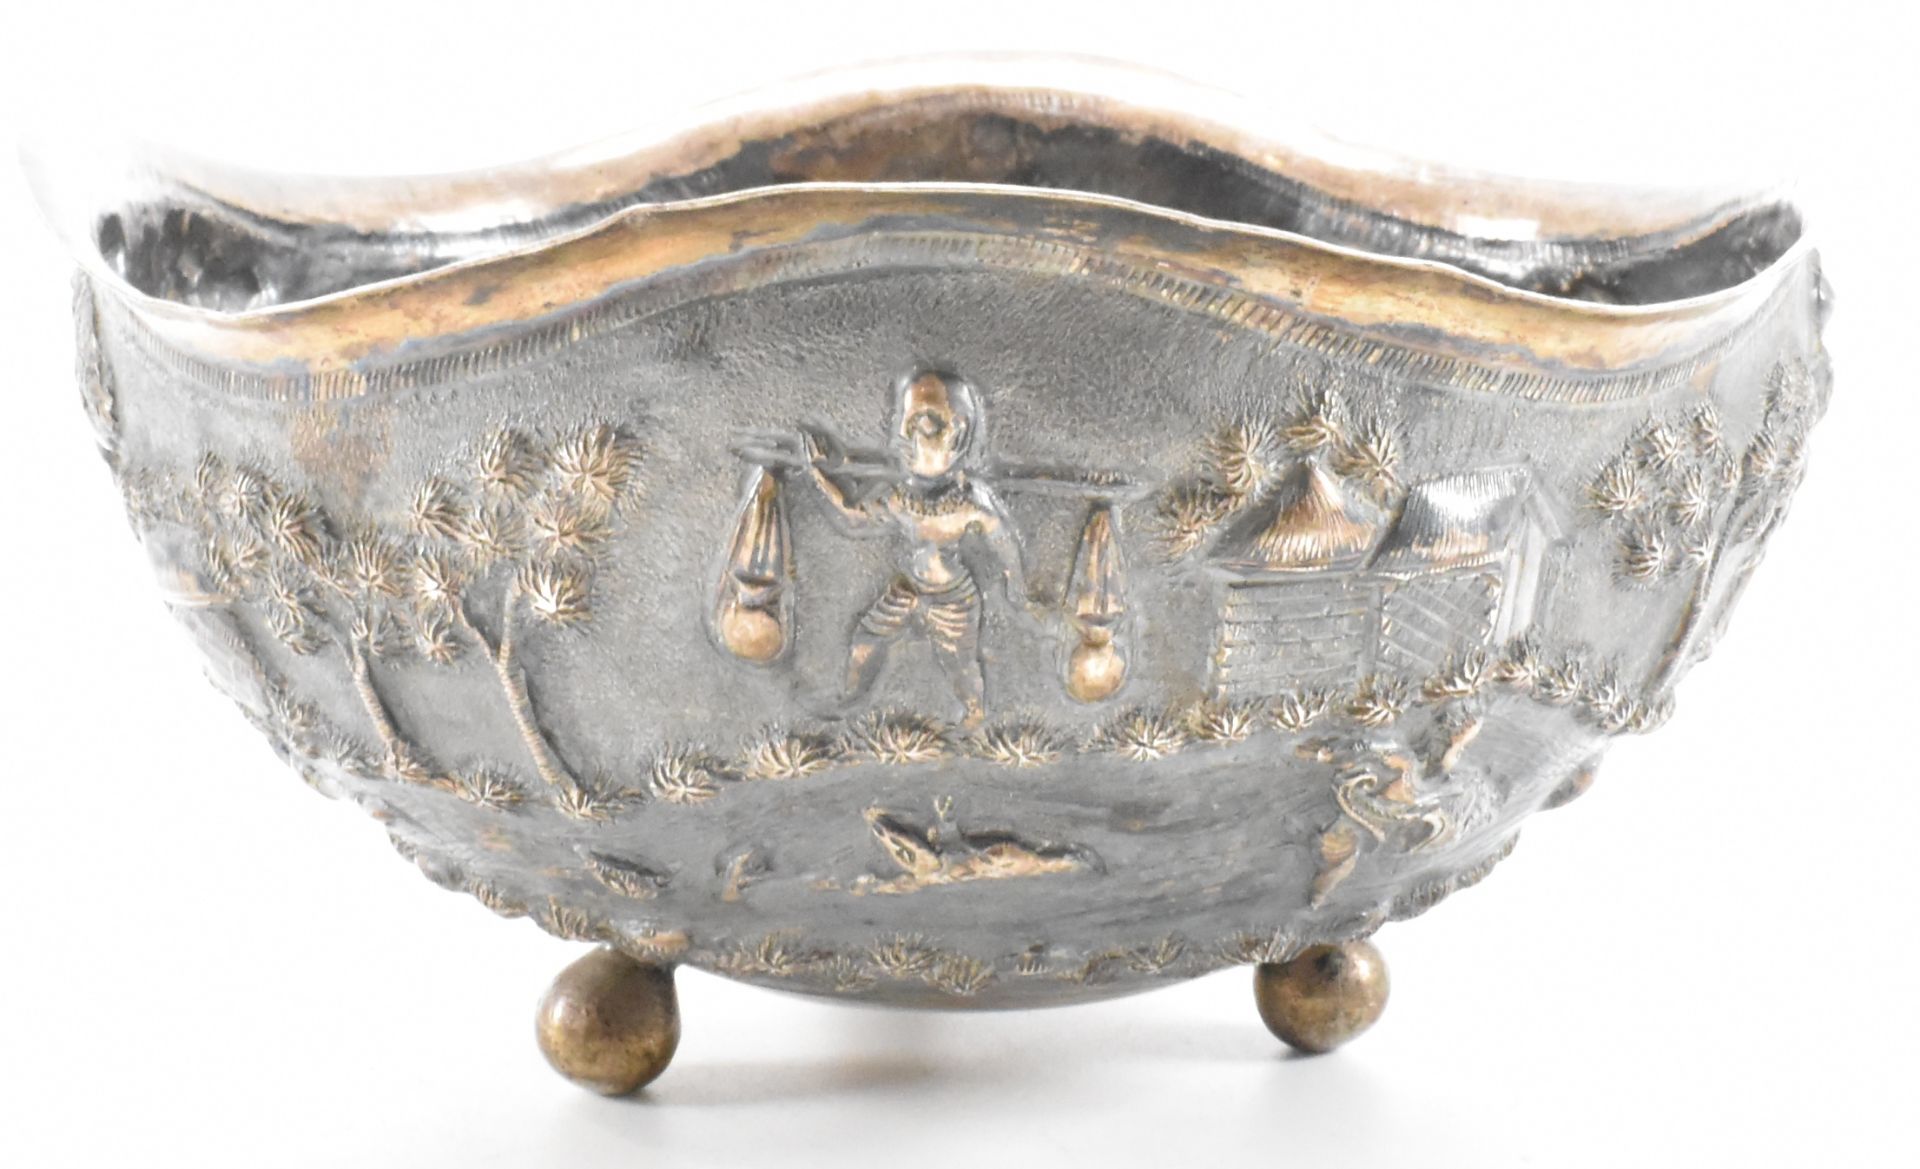 19TH CENTURY ANGLO INDIAN COLONIAL SILVER LUCKNOW BOWL